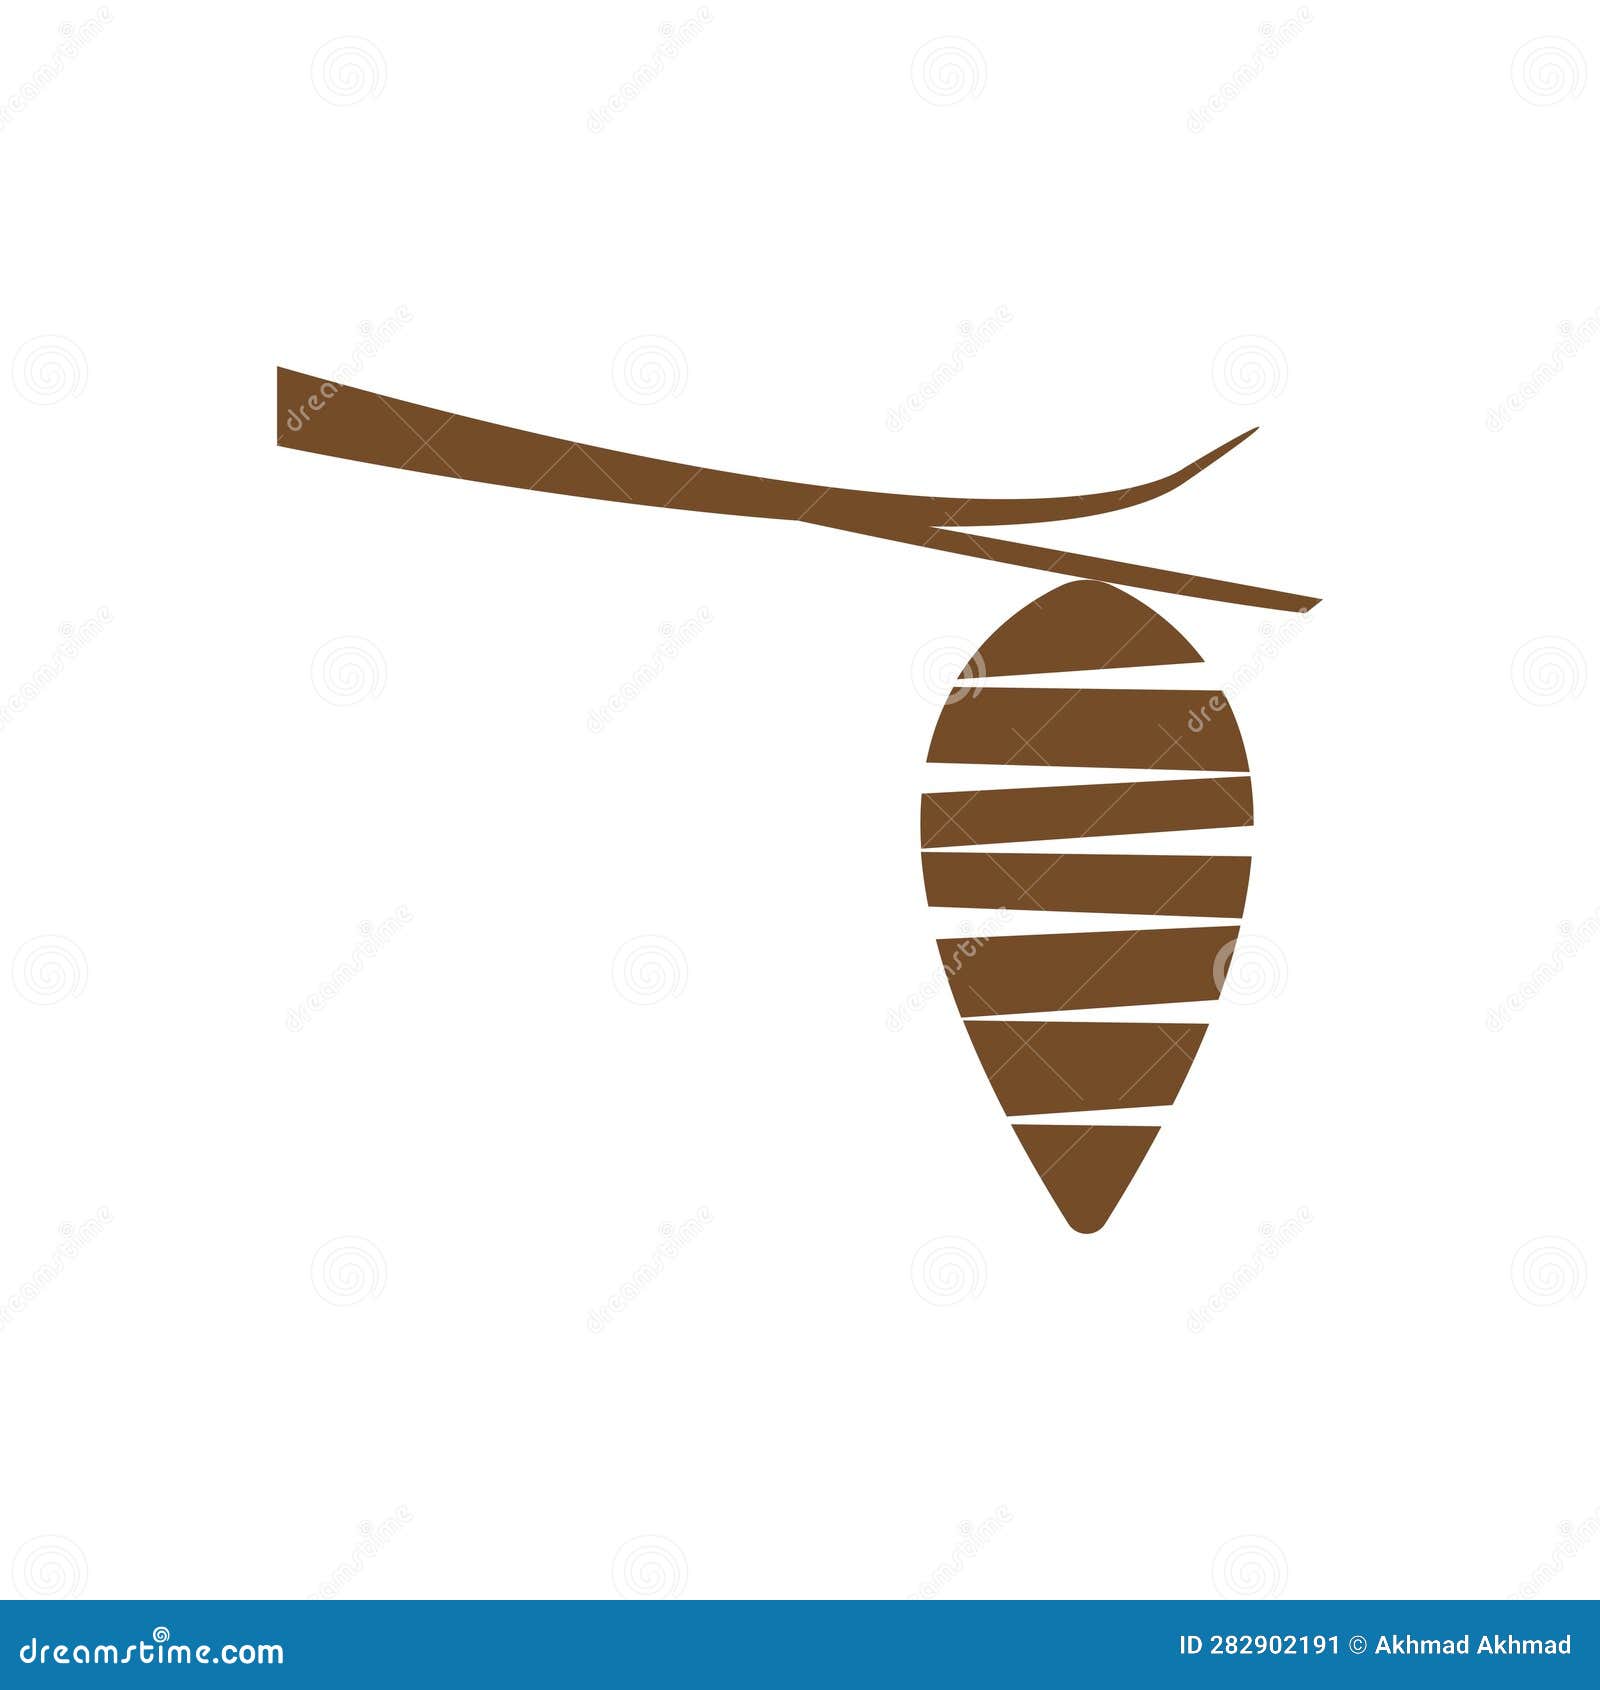 Cocoon icon stock vector. Illustration of abstract, cocoons - 282902191